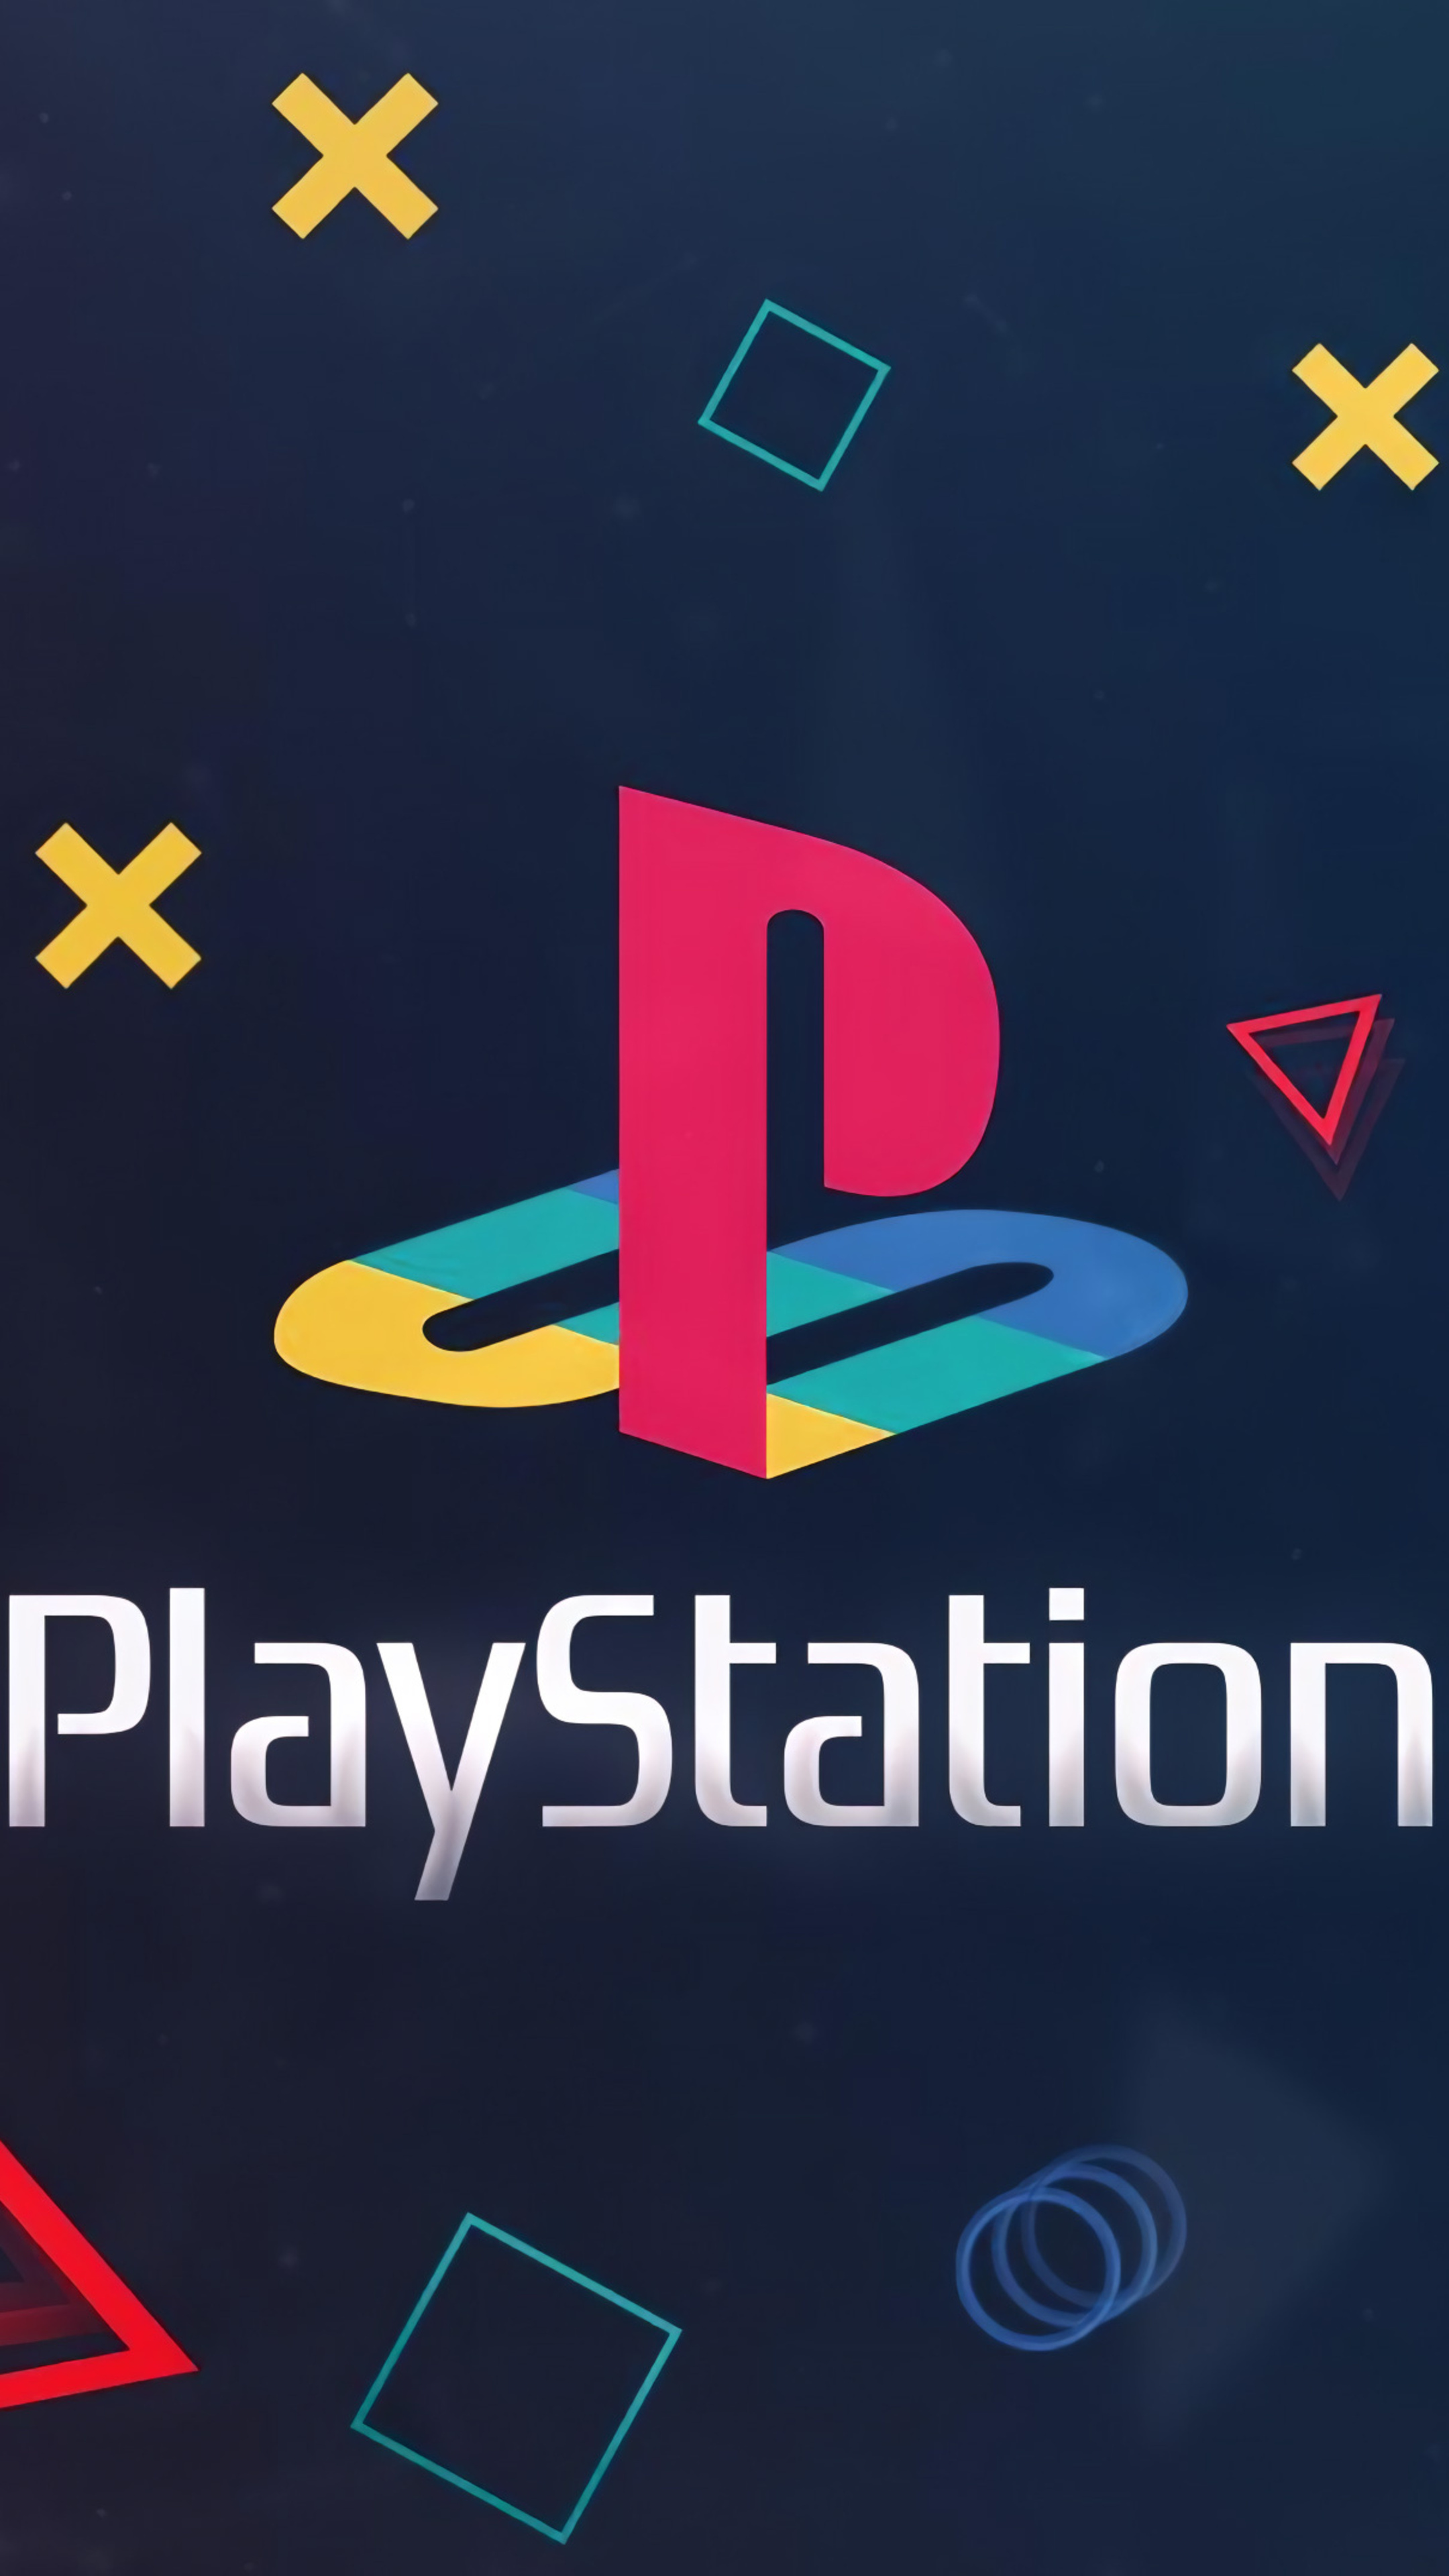 PlayStation logo background, Xperia wallpapers, 2160x3840 4K Phone